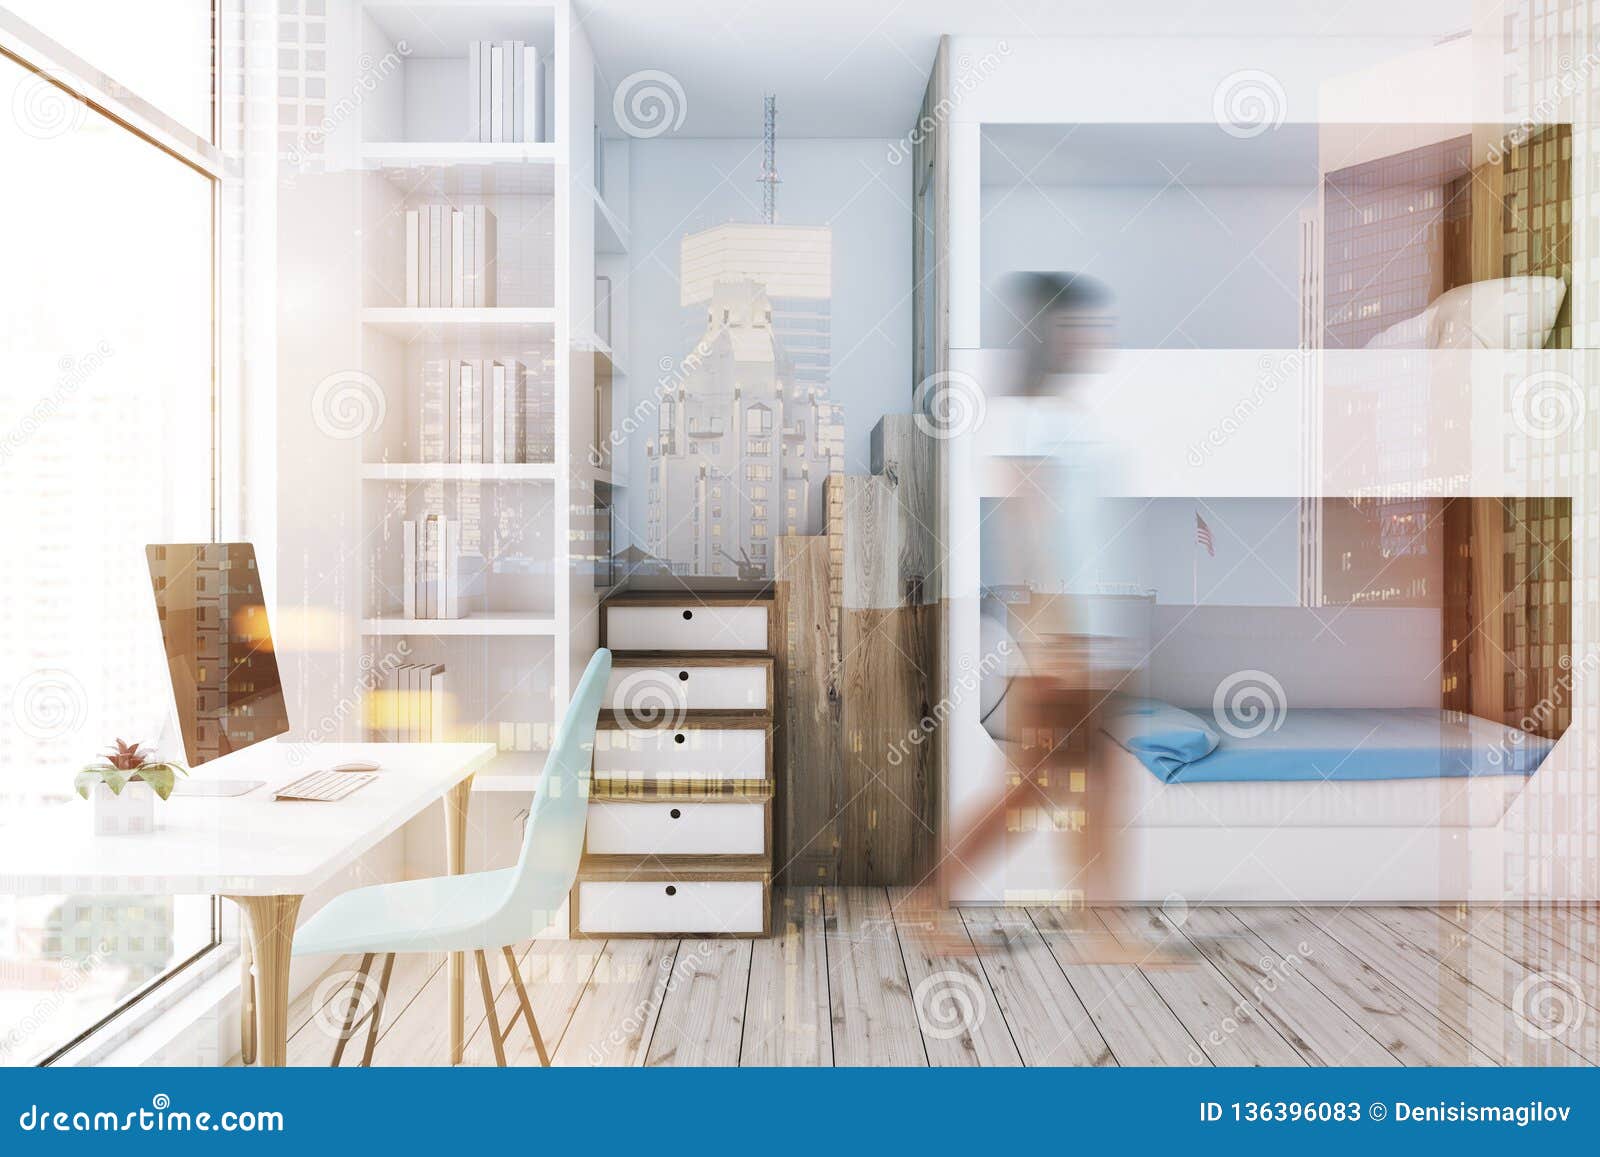 White Bunk Bed Bedroom Computer Desk Girl Stock Image Image Of